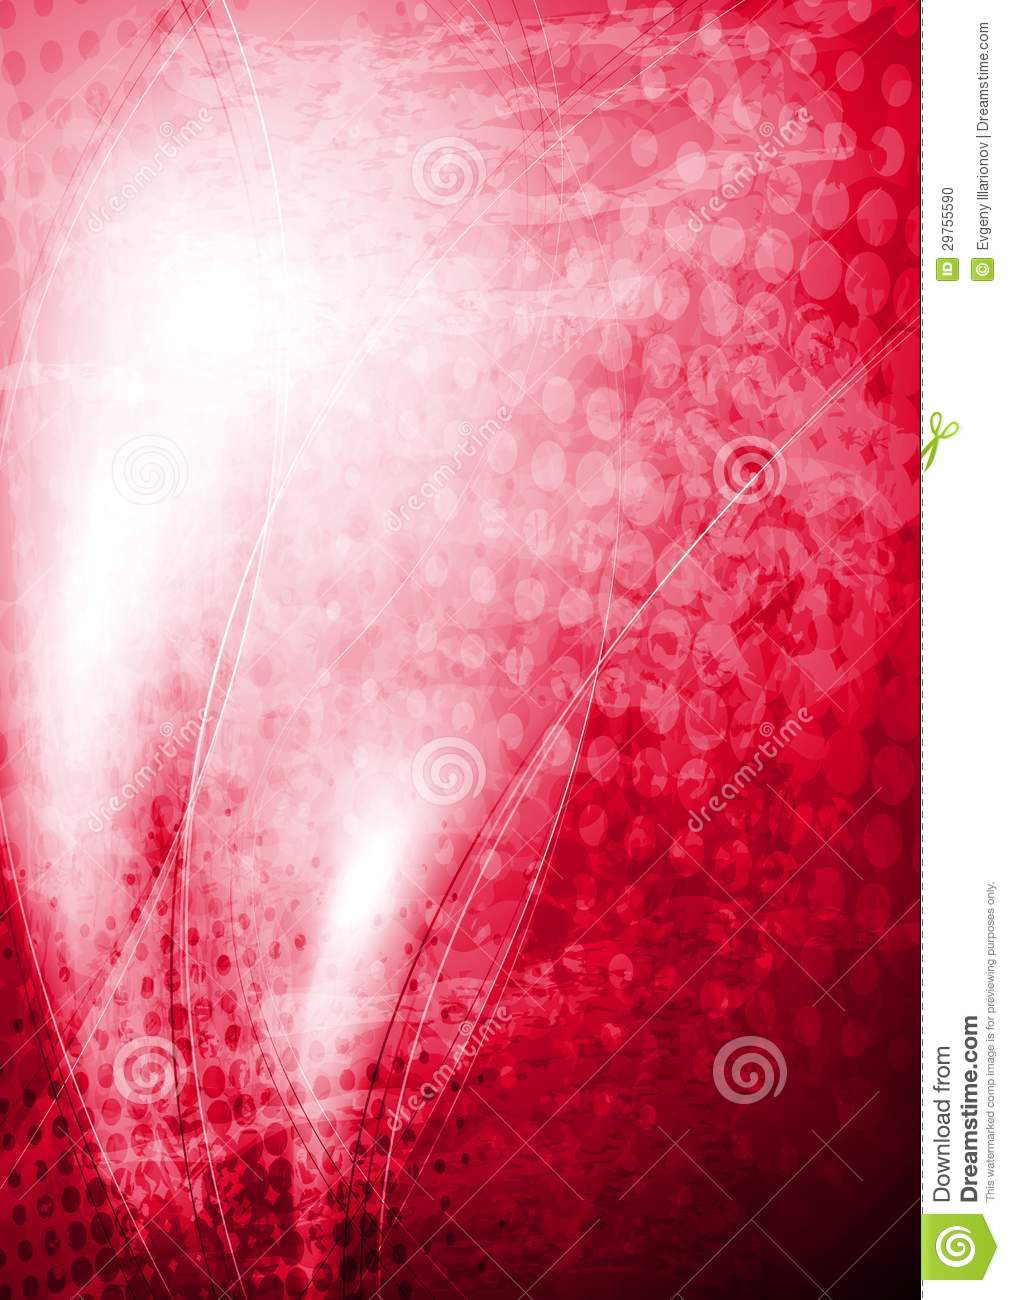 Red Wavy Abstract Background Vector